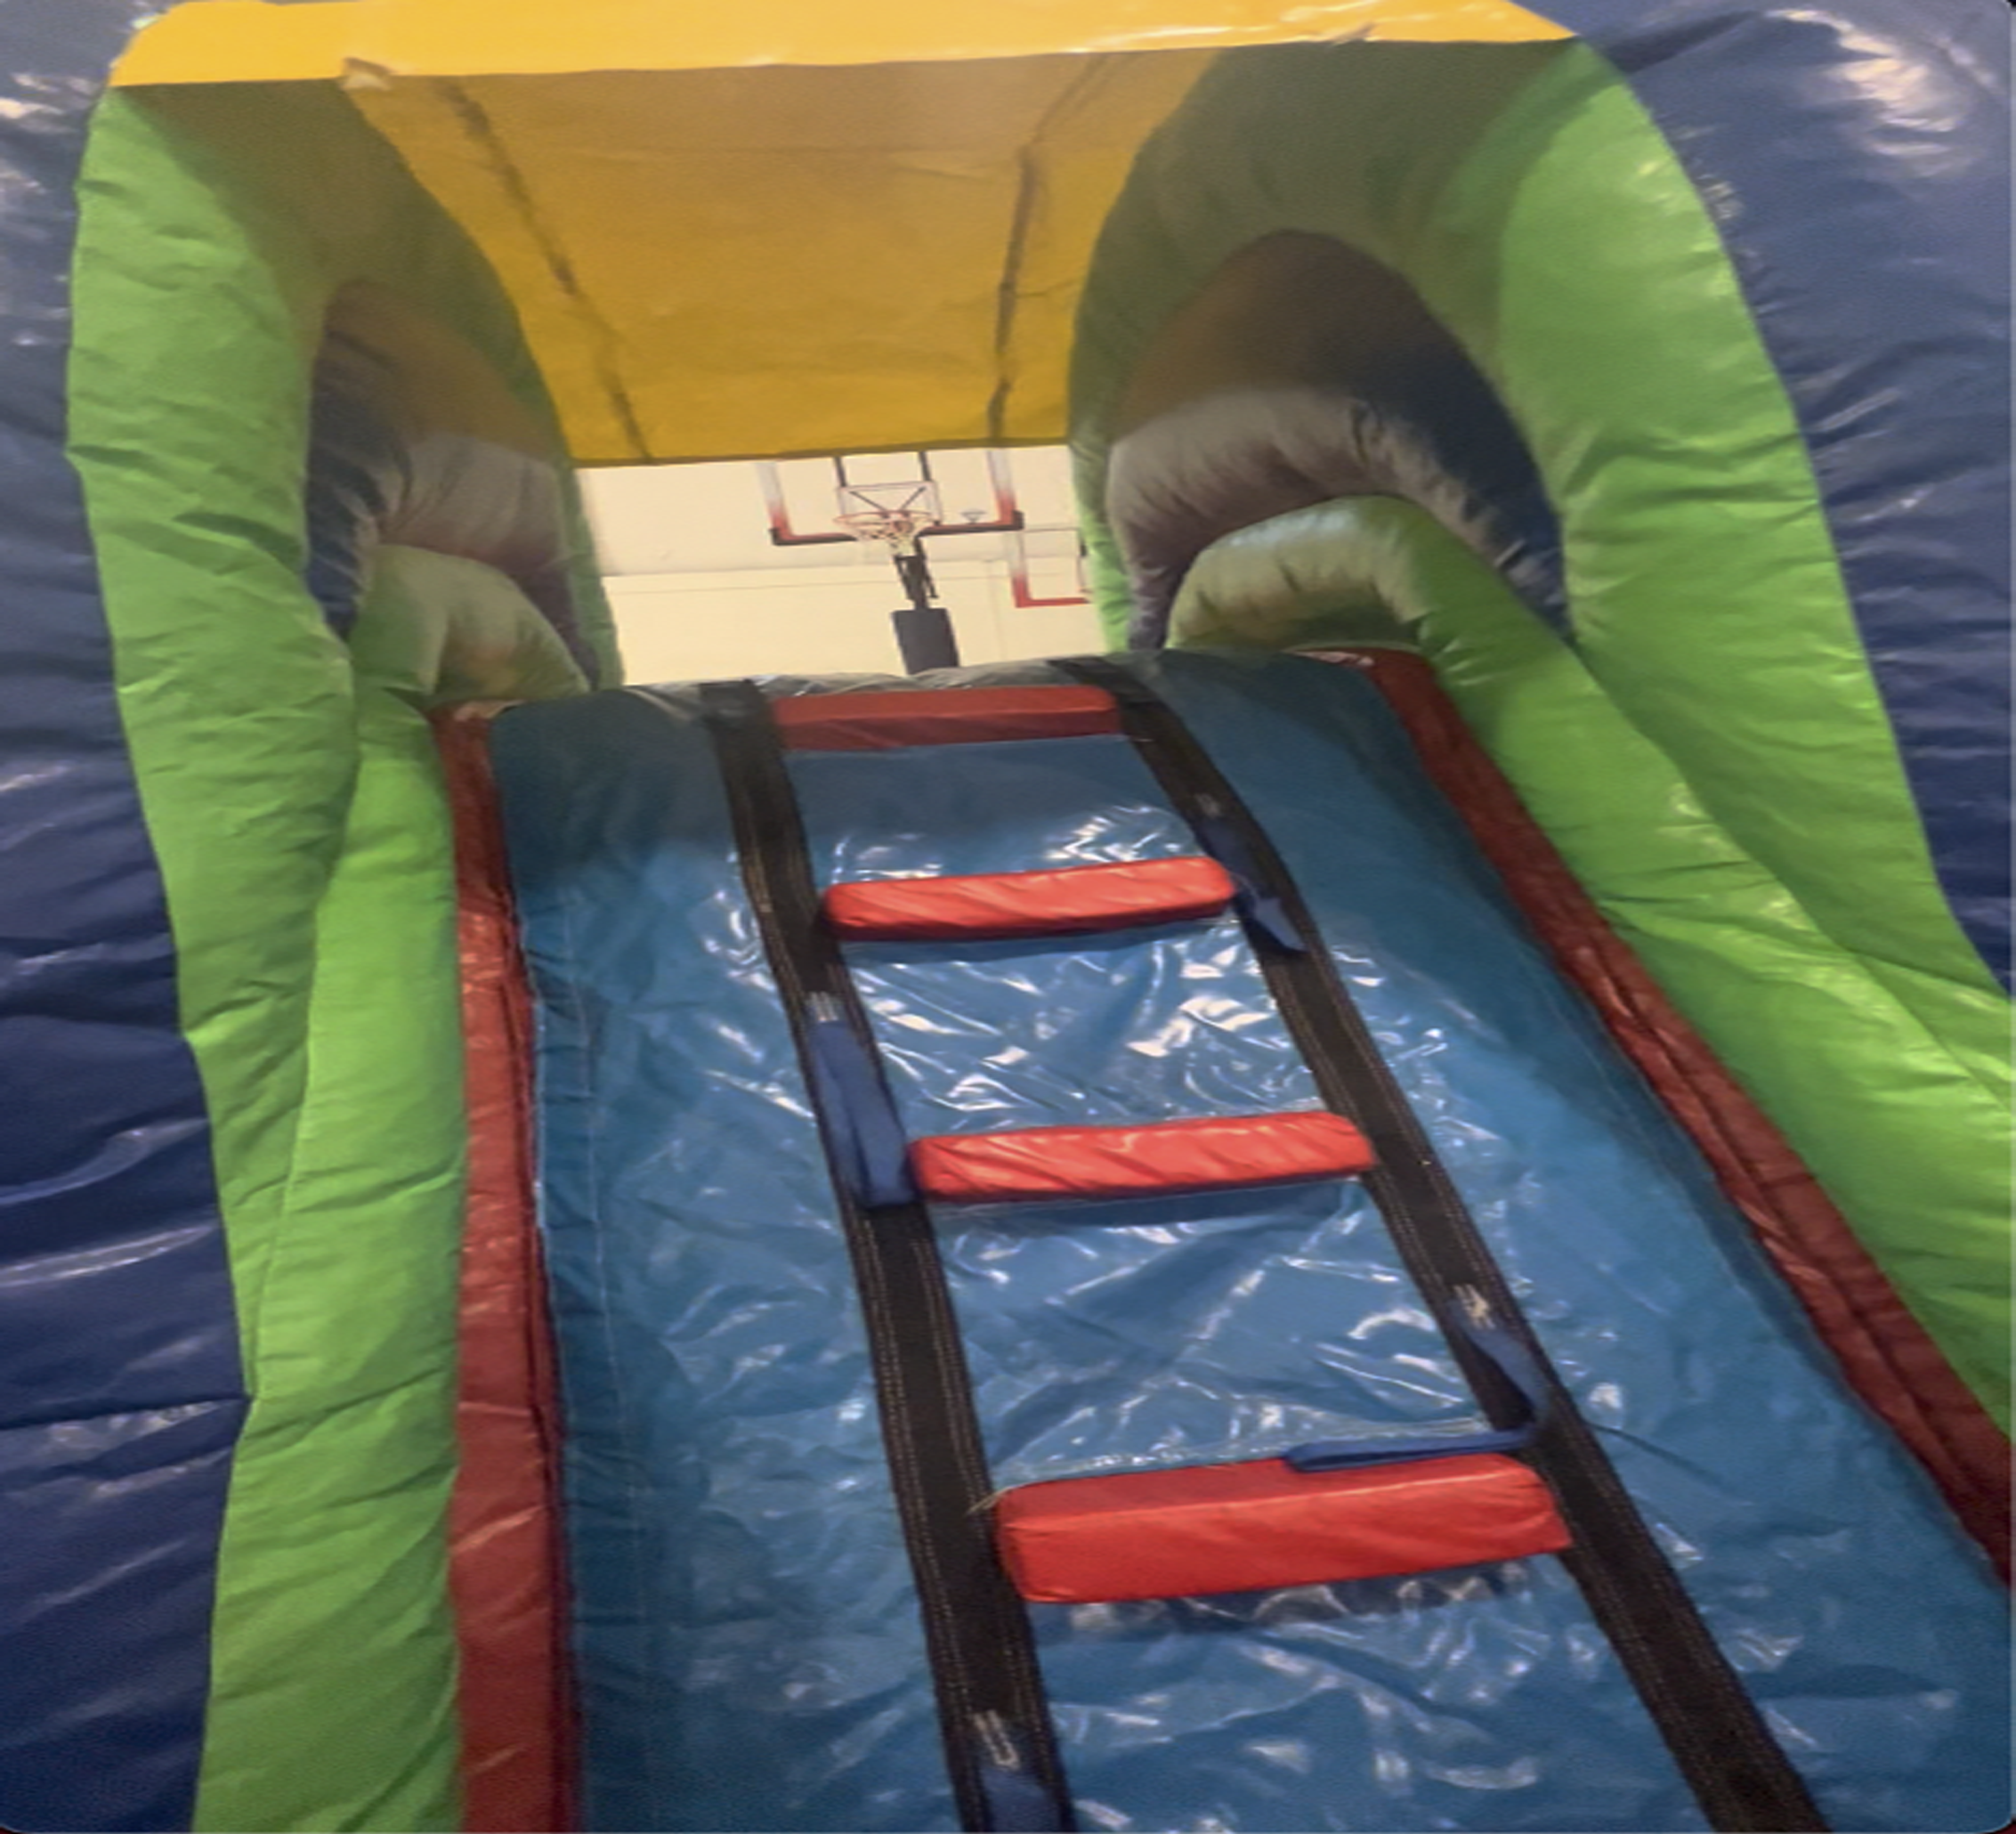 toddler inflatable bounce house